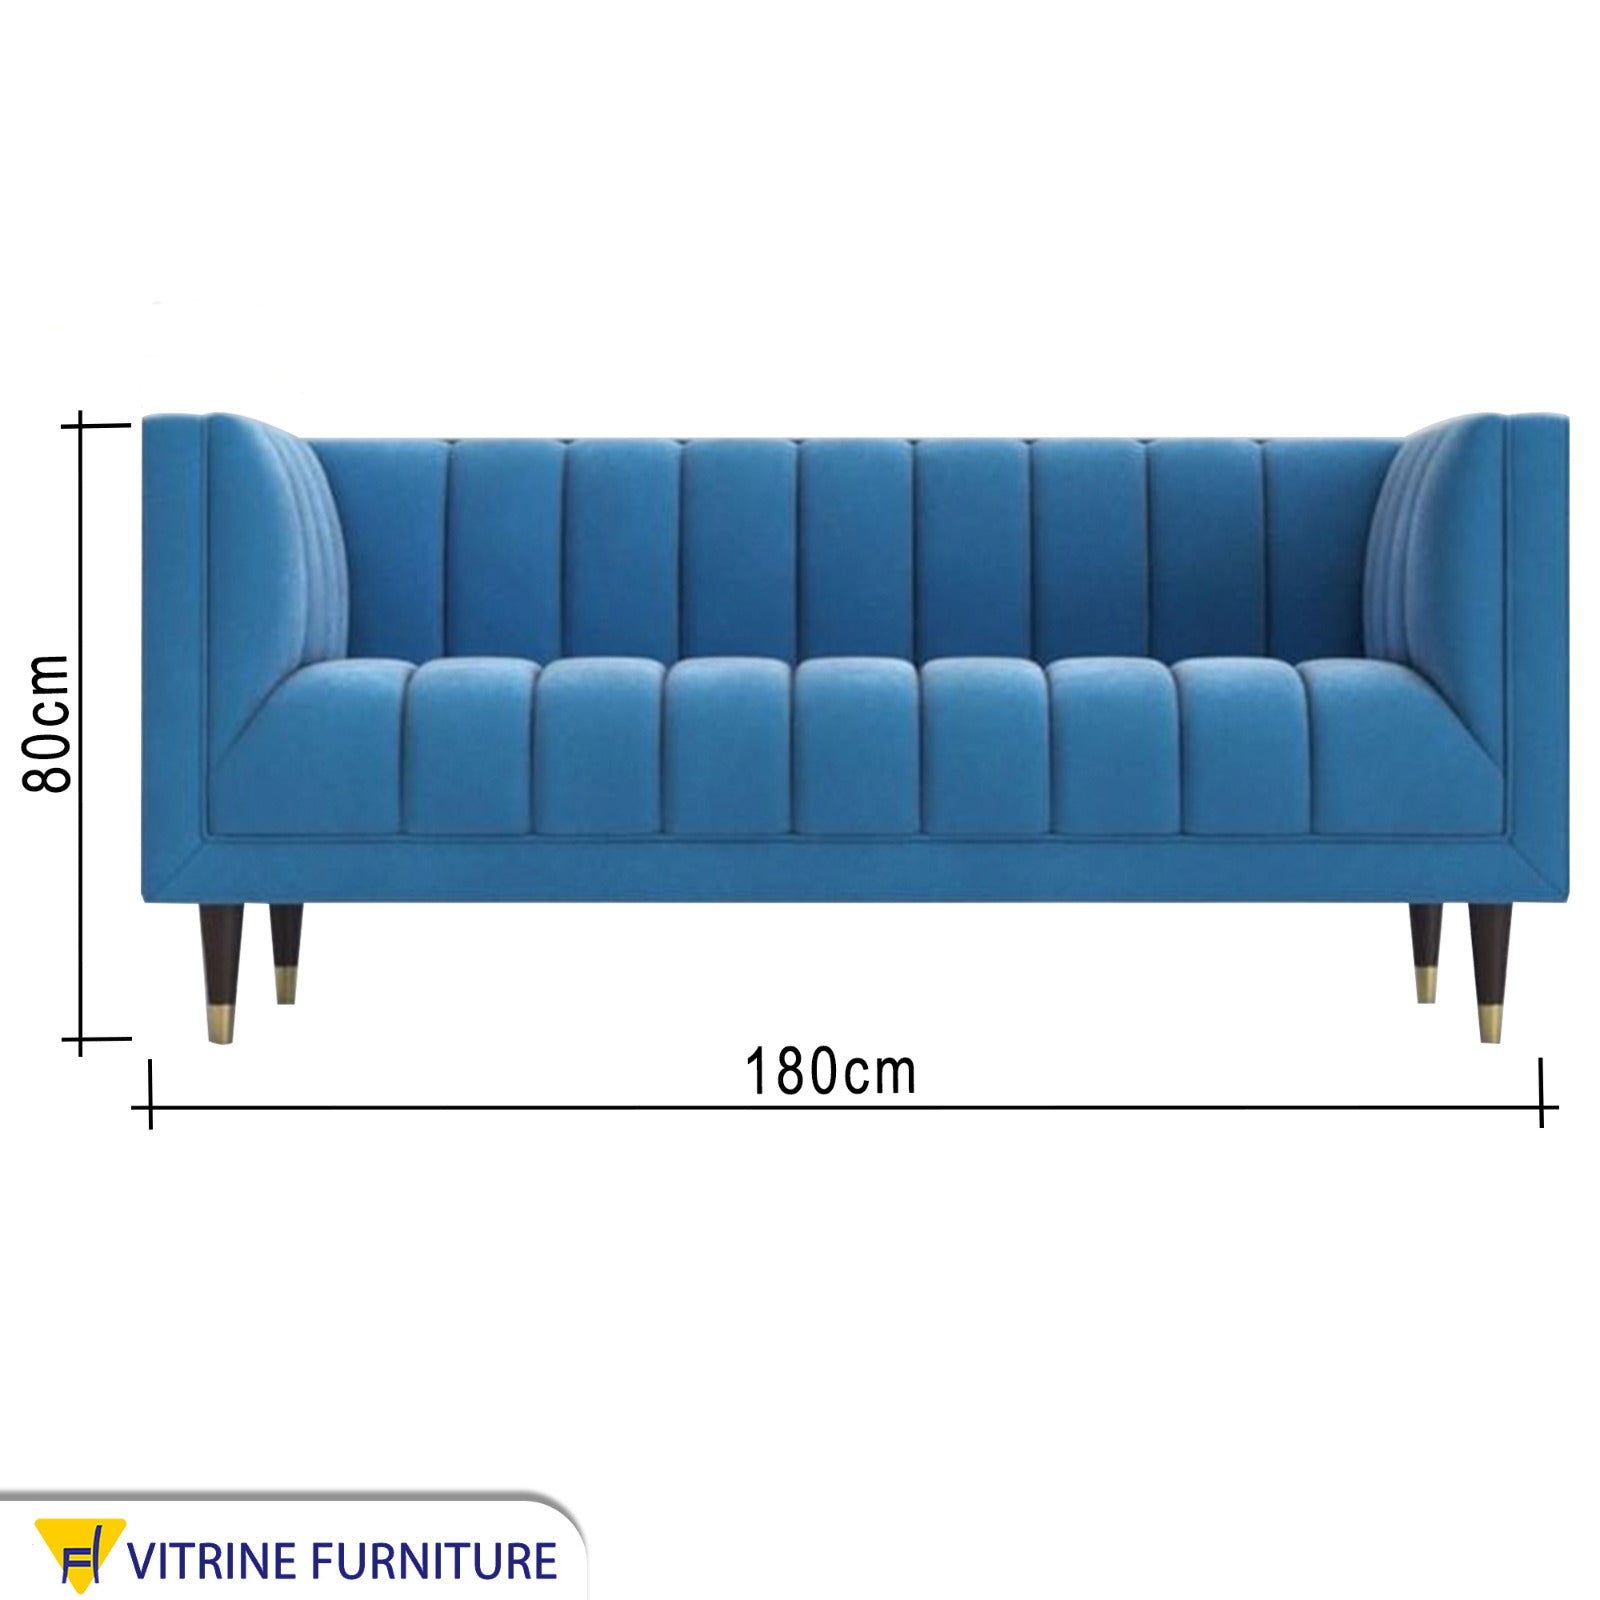 Baby blue sofa with recessed lines on the back and base